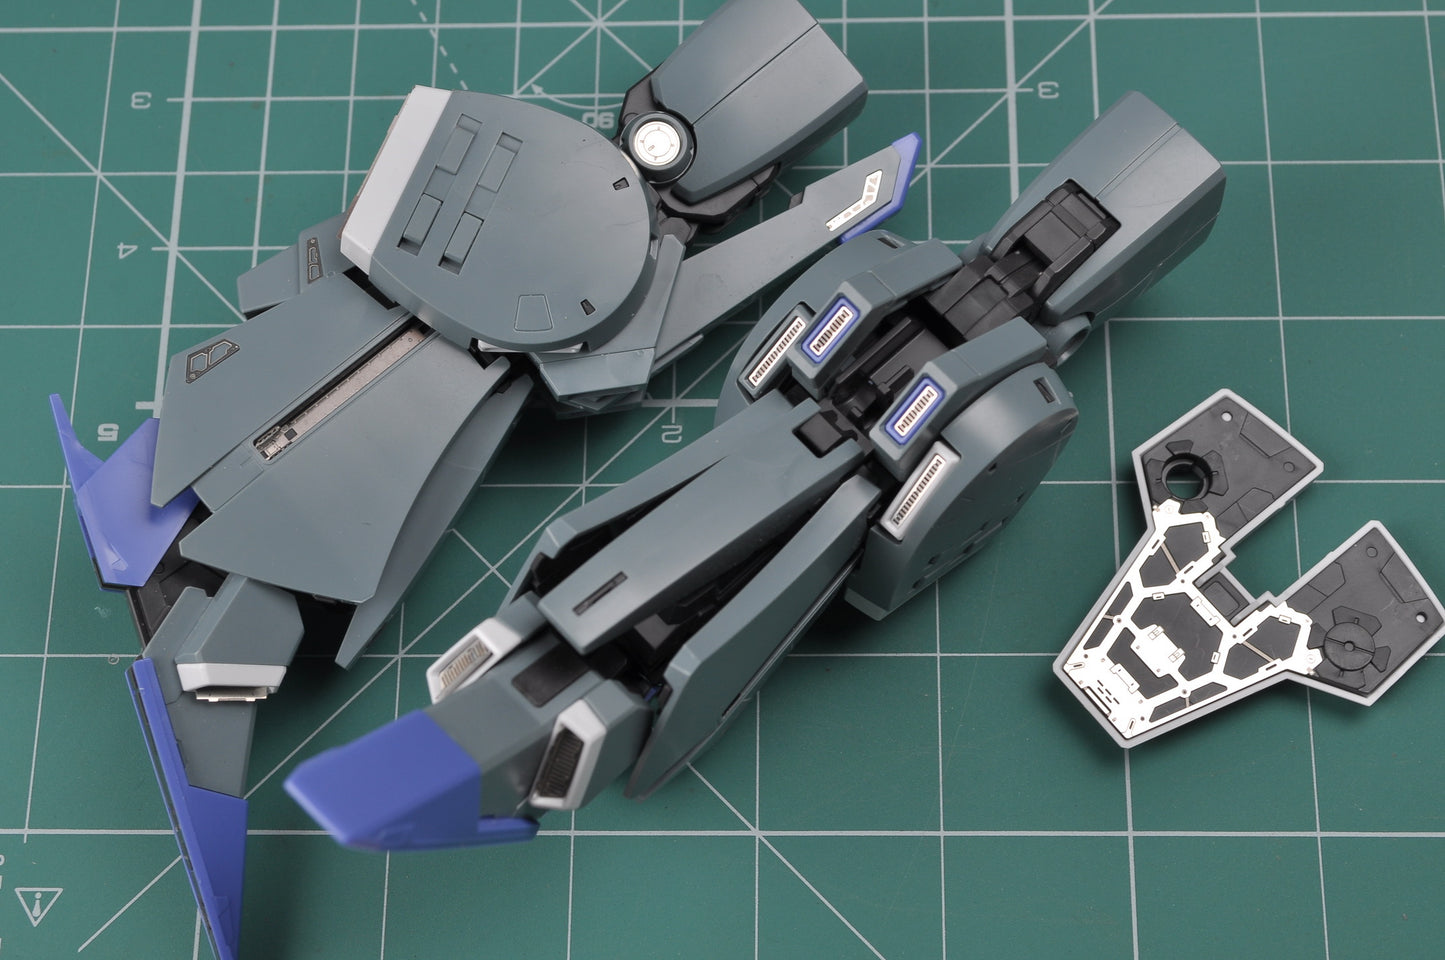 Madworks S016 Etching Parts for MG FAZZ ver. Ka